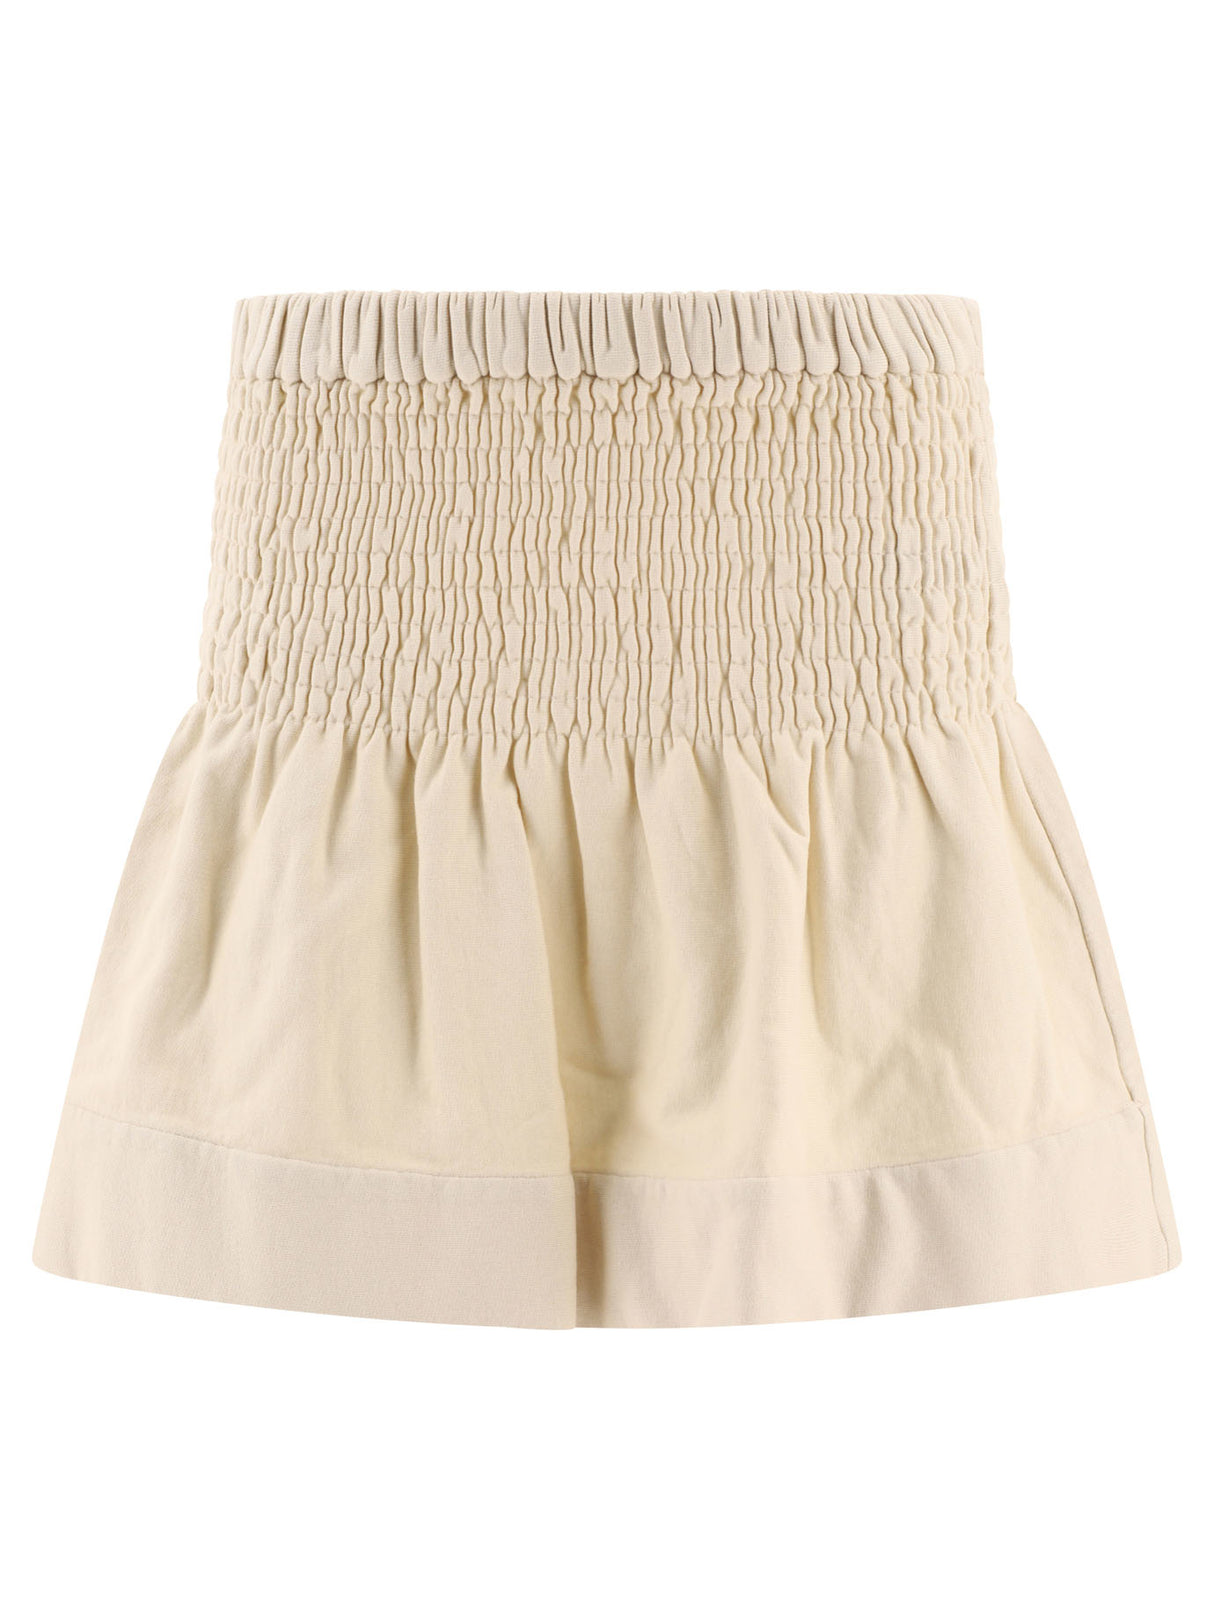 ISABEL MARANT Casual Beige Smocked Skirt for Women - SS24 Collection